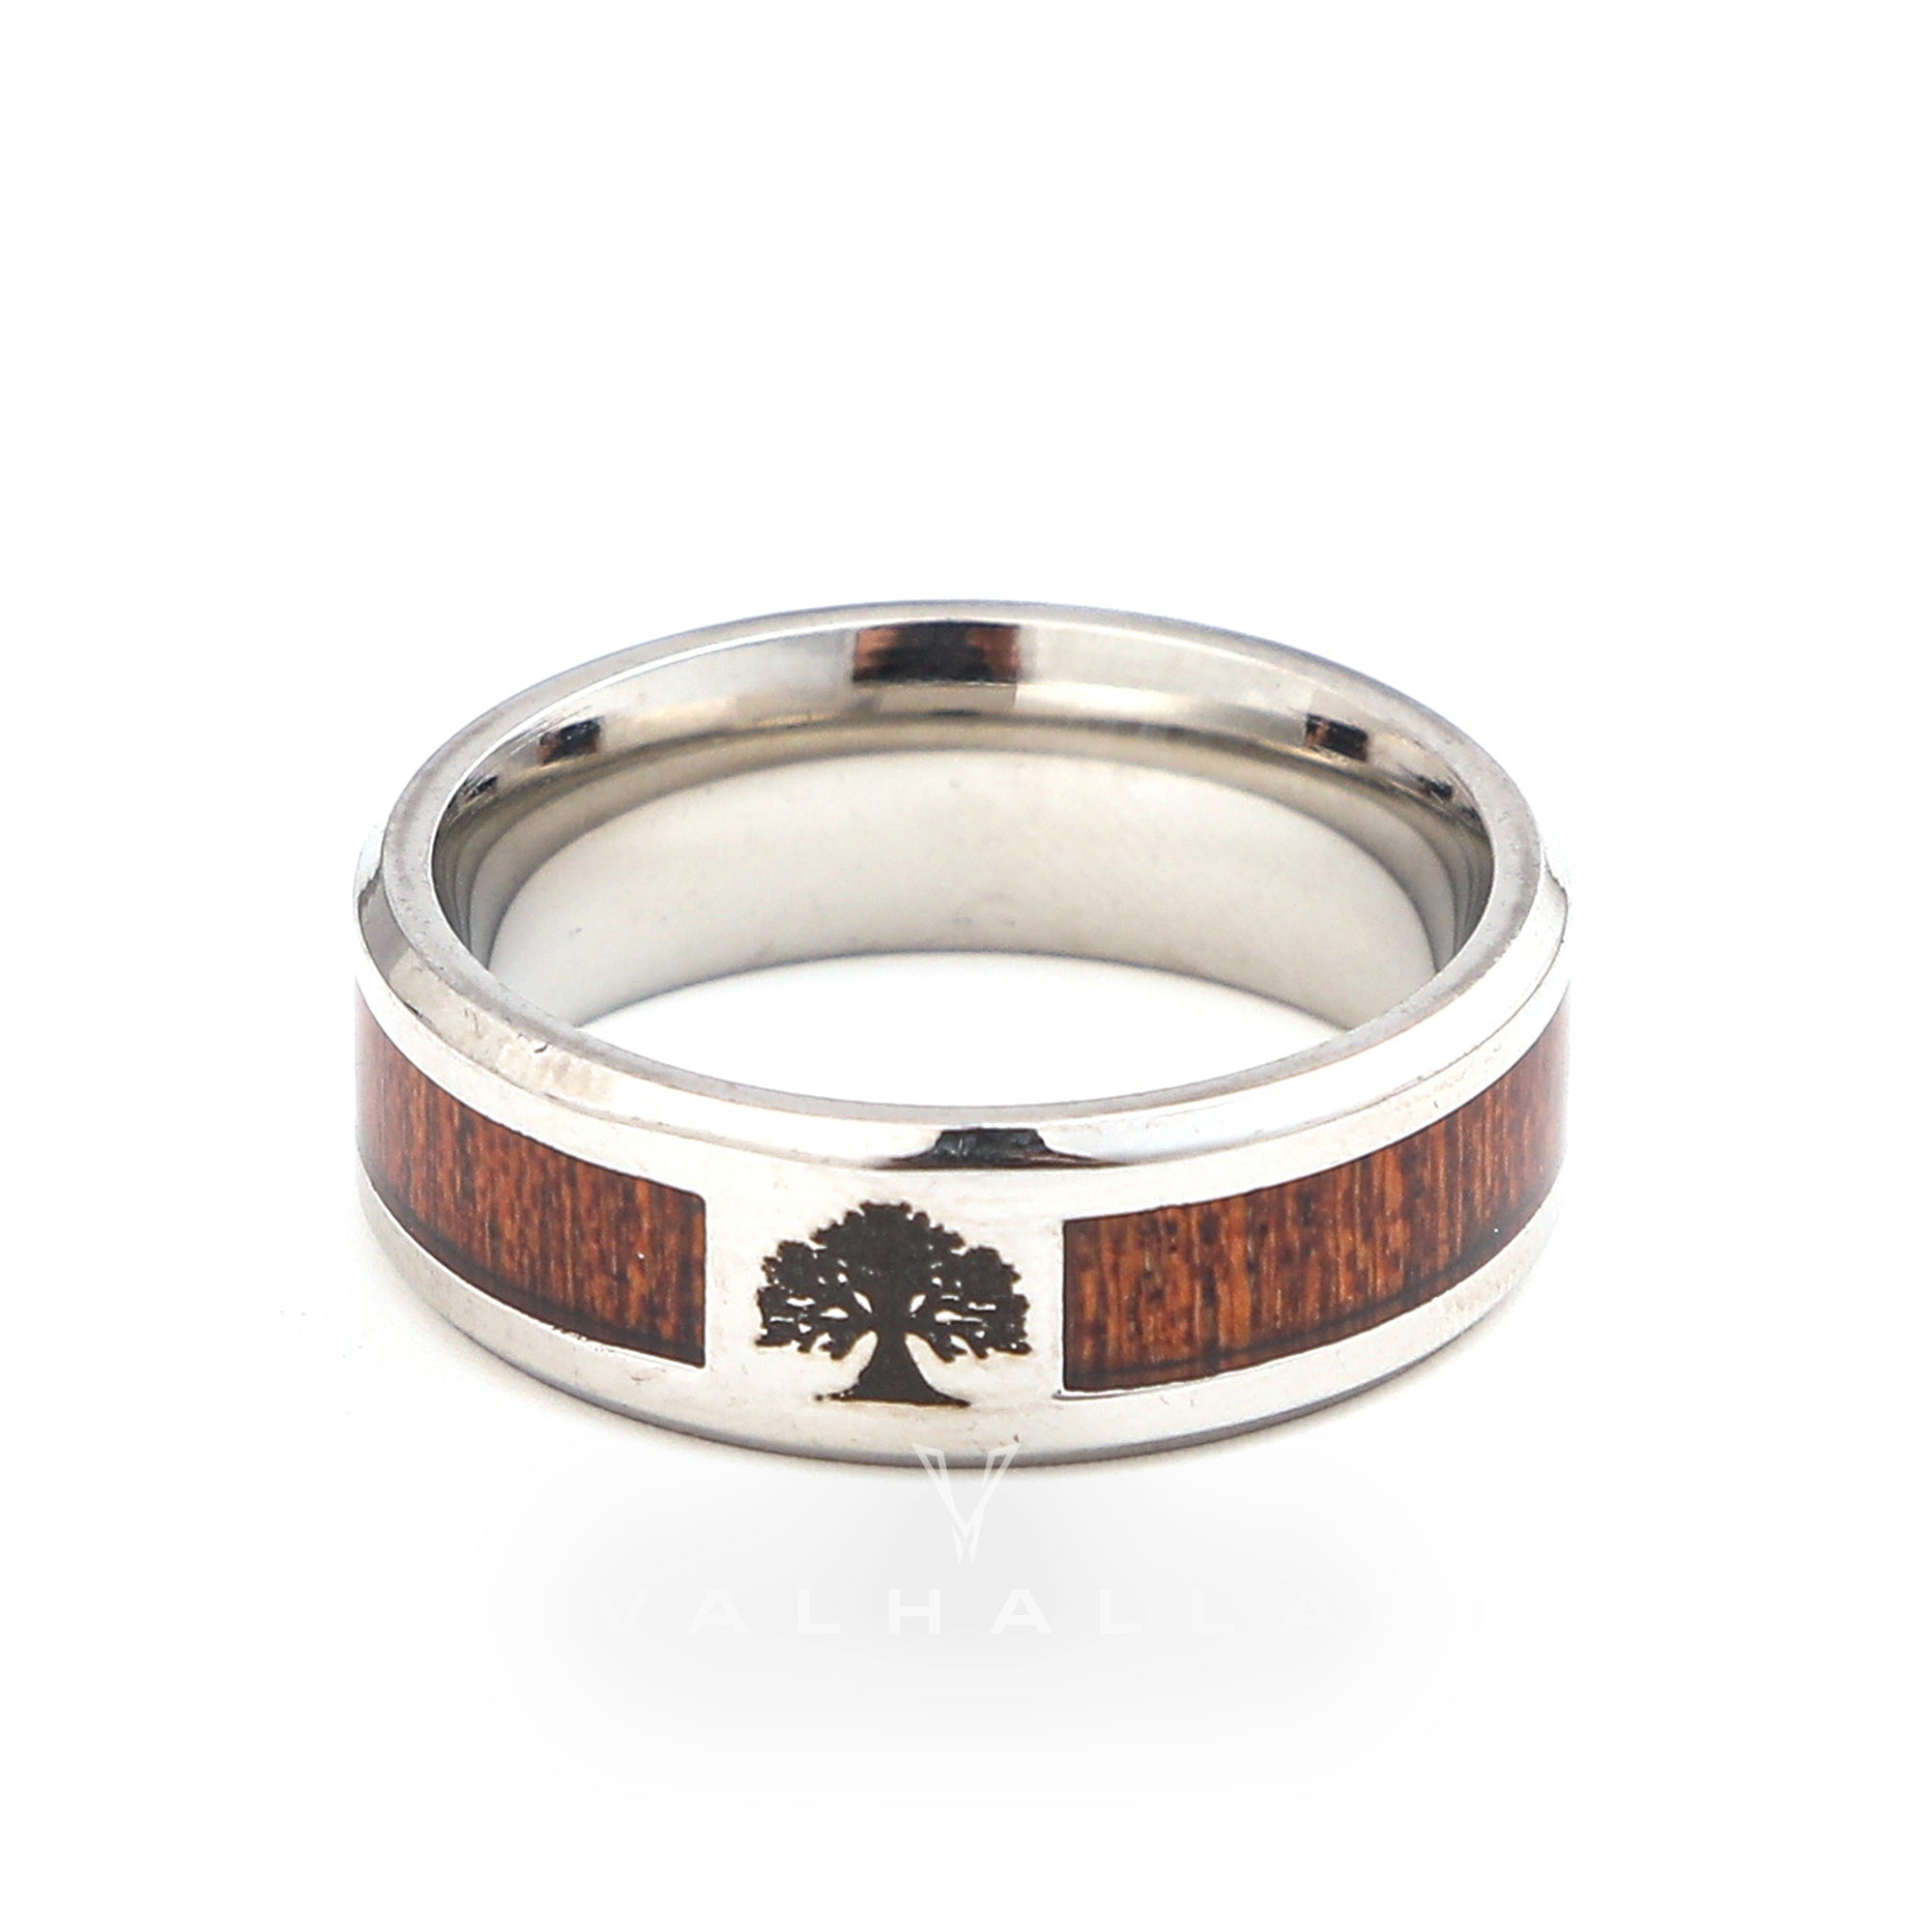 Handcrafted Stainless Steel Tree of Life / Yggdrasil and Wood Inlay Wedding Band